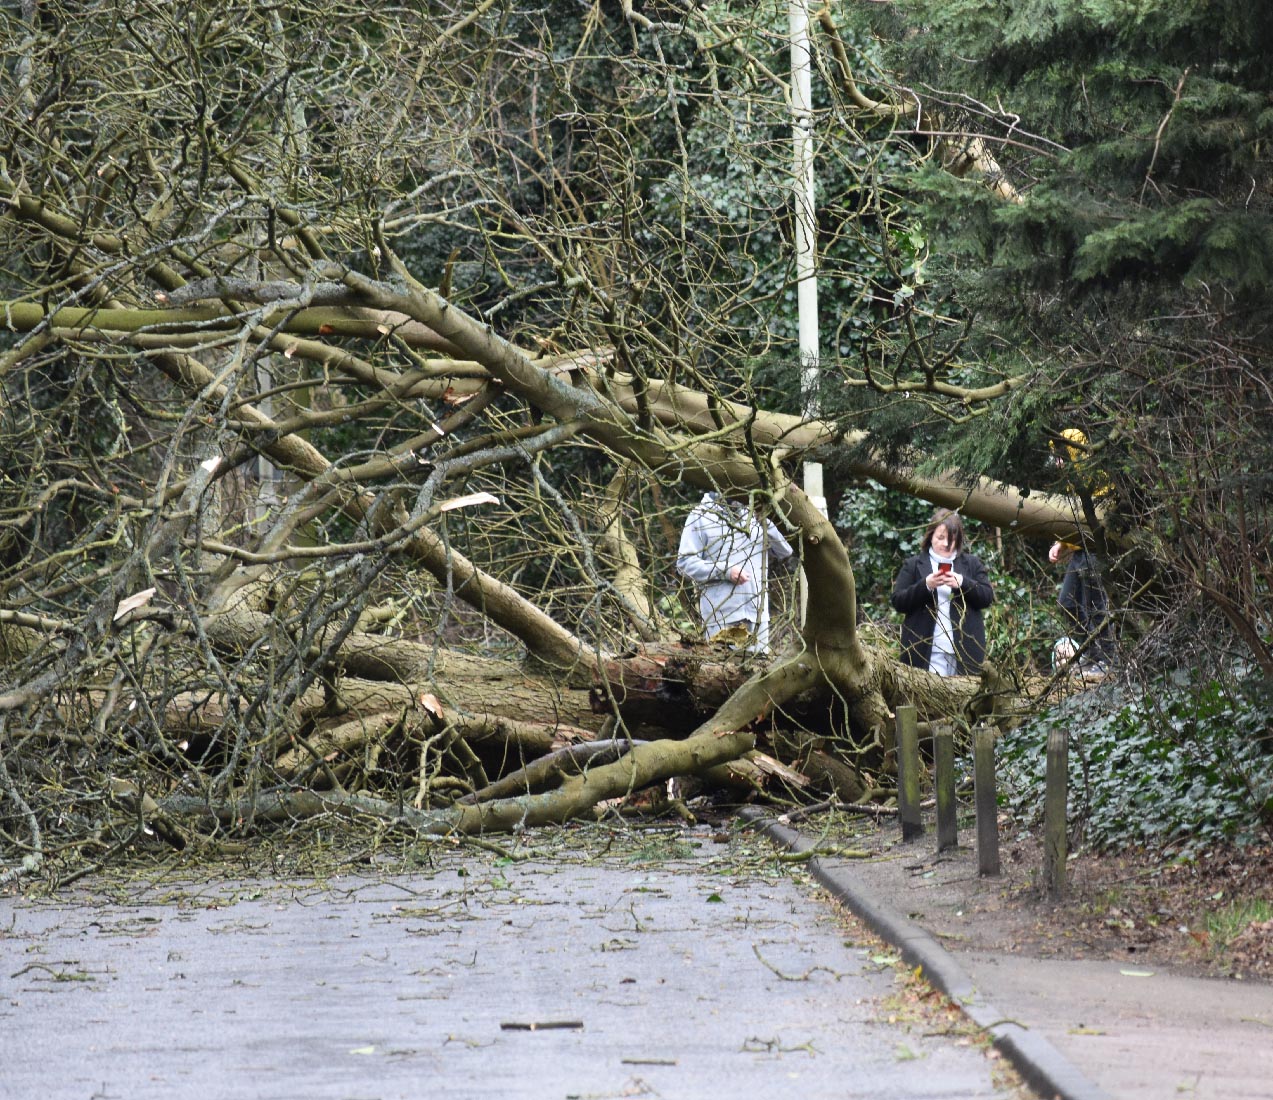 Storm Ciara brings down trees and closes roads in Hertfordshire